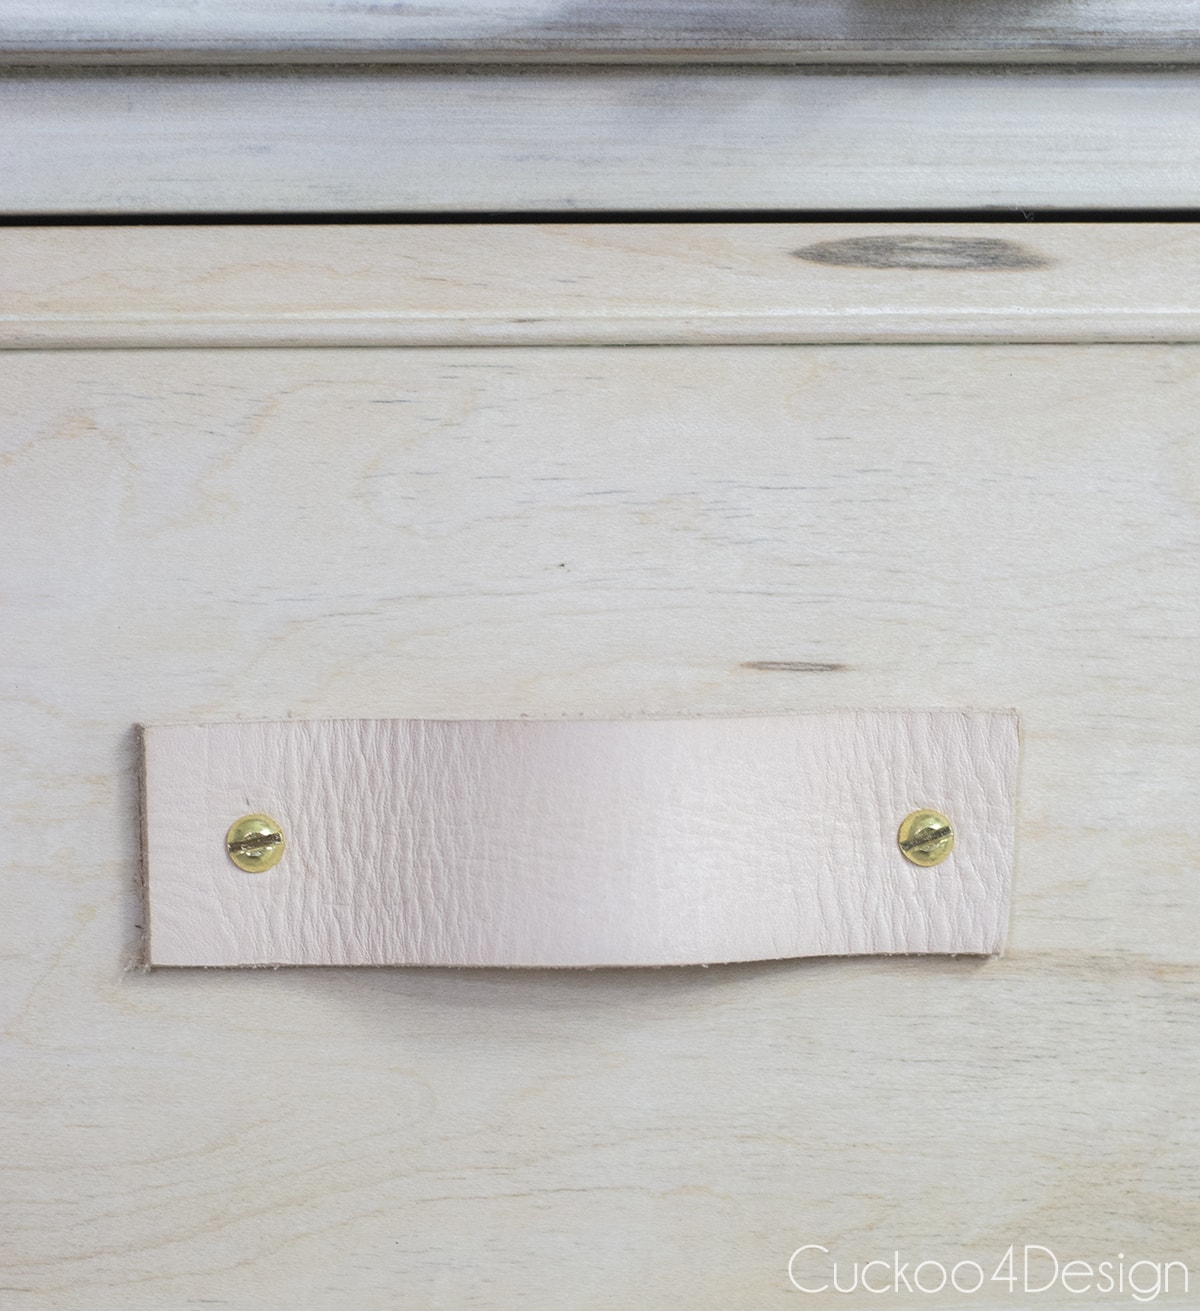 How to make leather drawer pulls for any cabinet or dresser